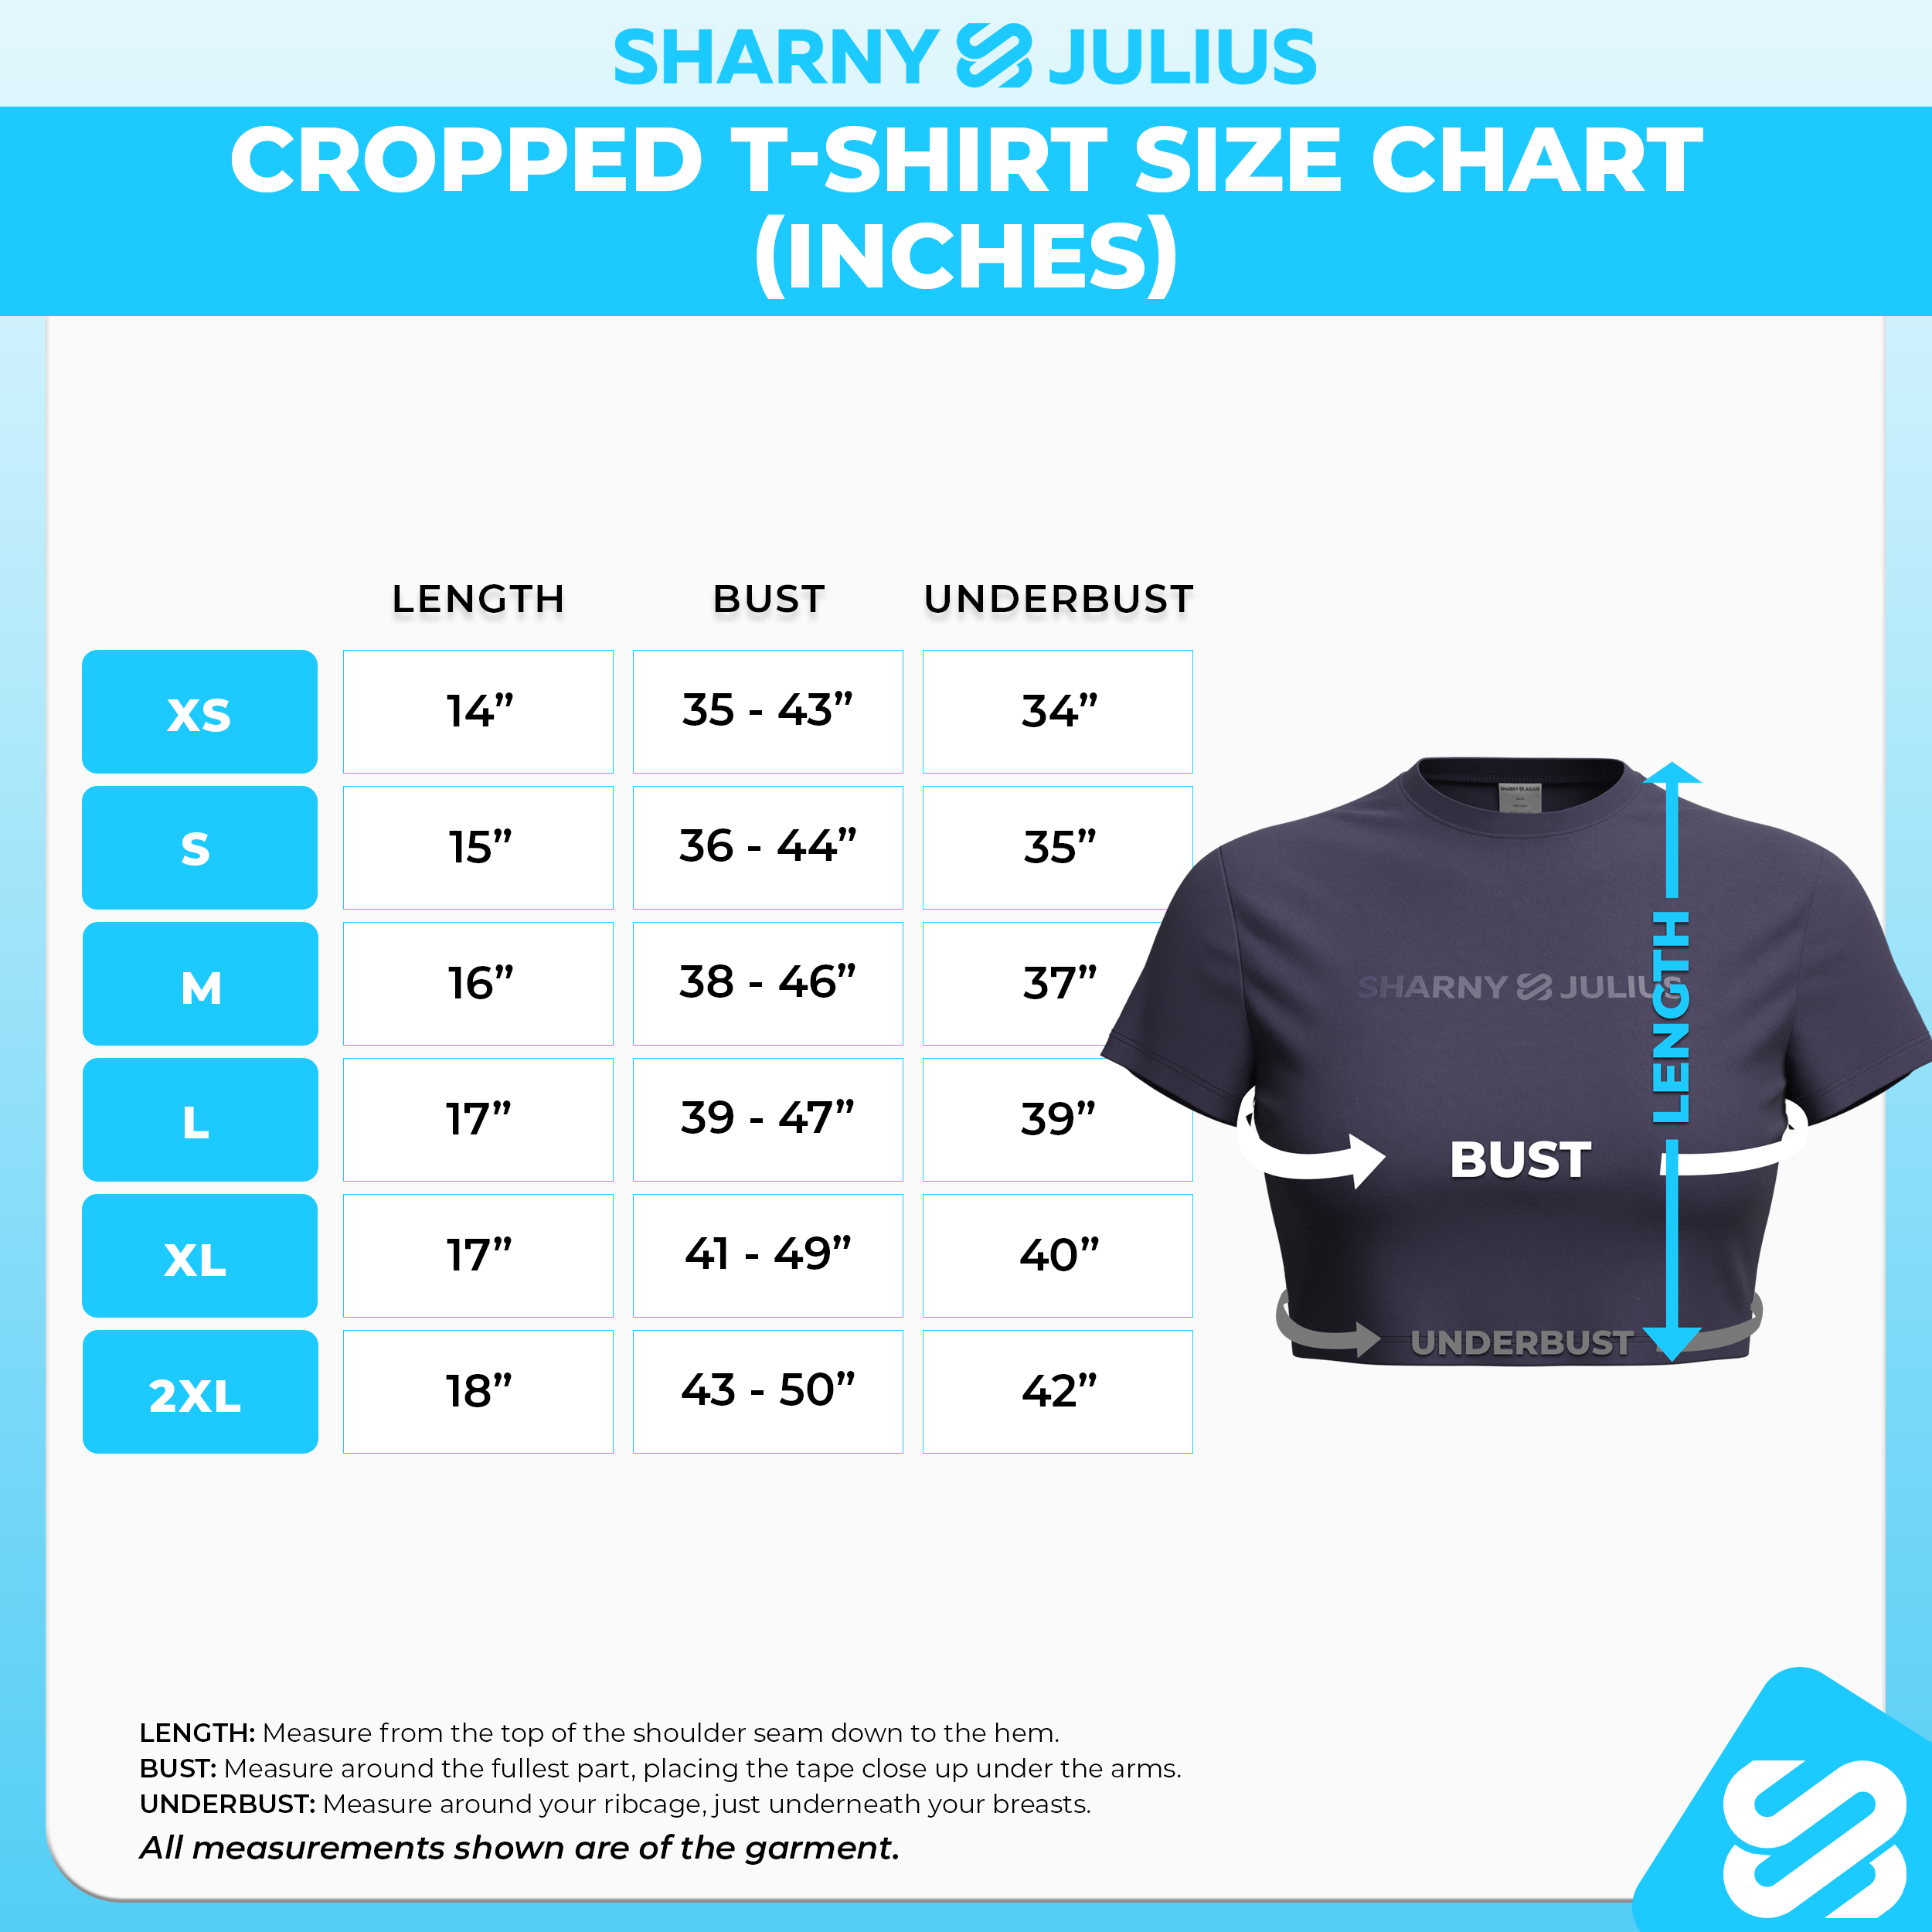 Cropped T-Shirt Size Chart (Imperial)